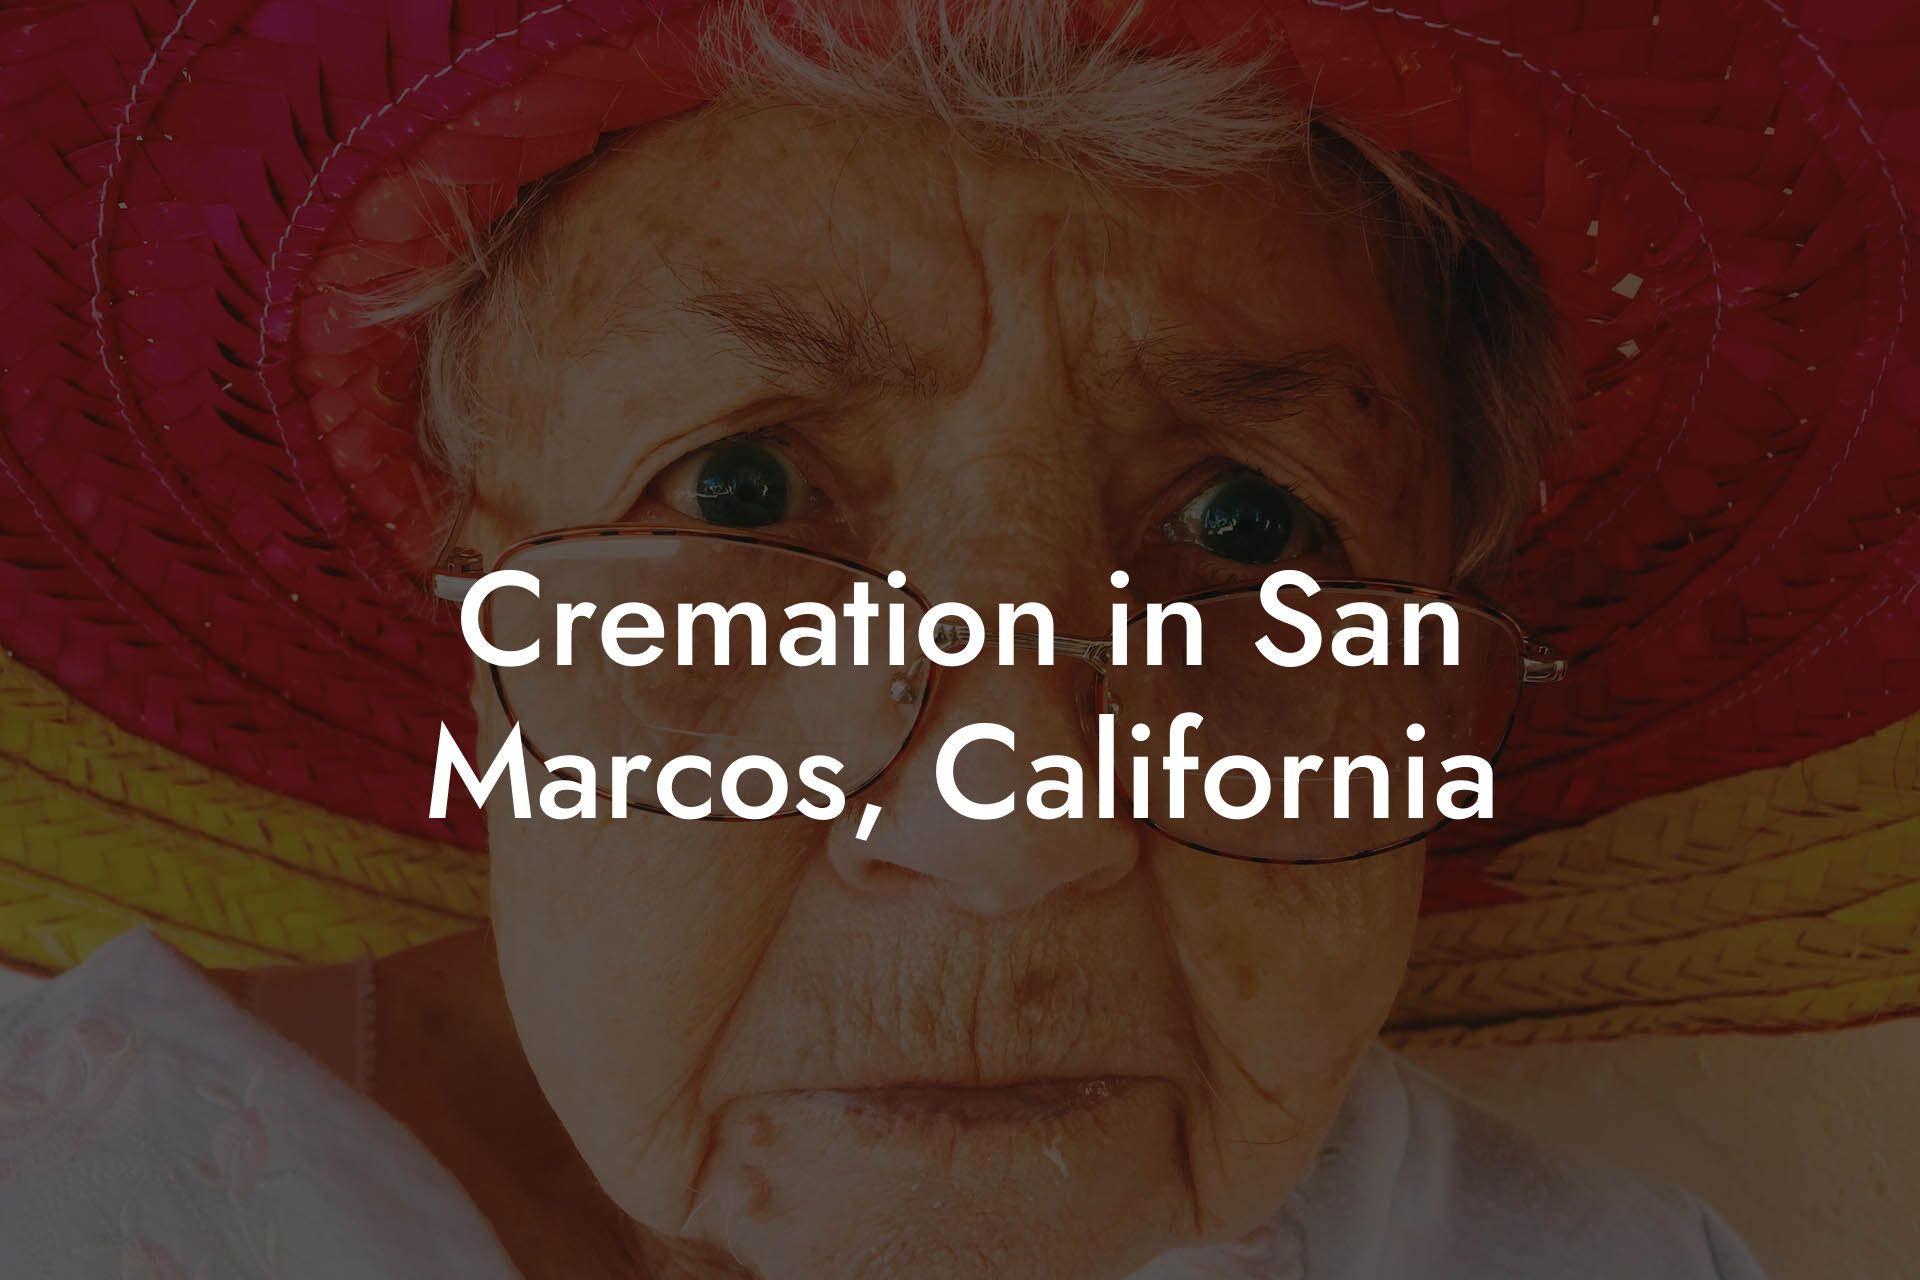 Cremation in San Marcos, California